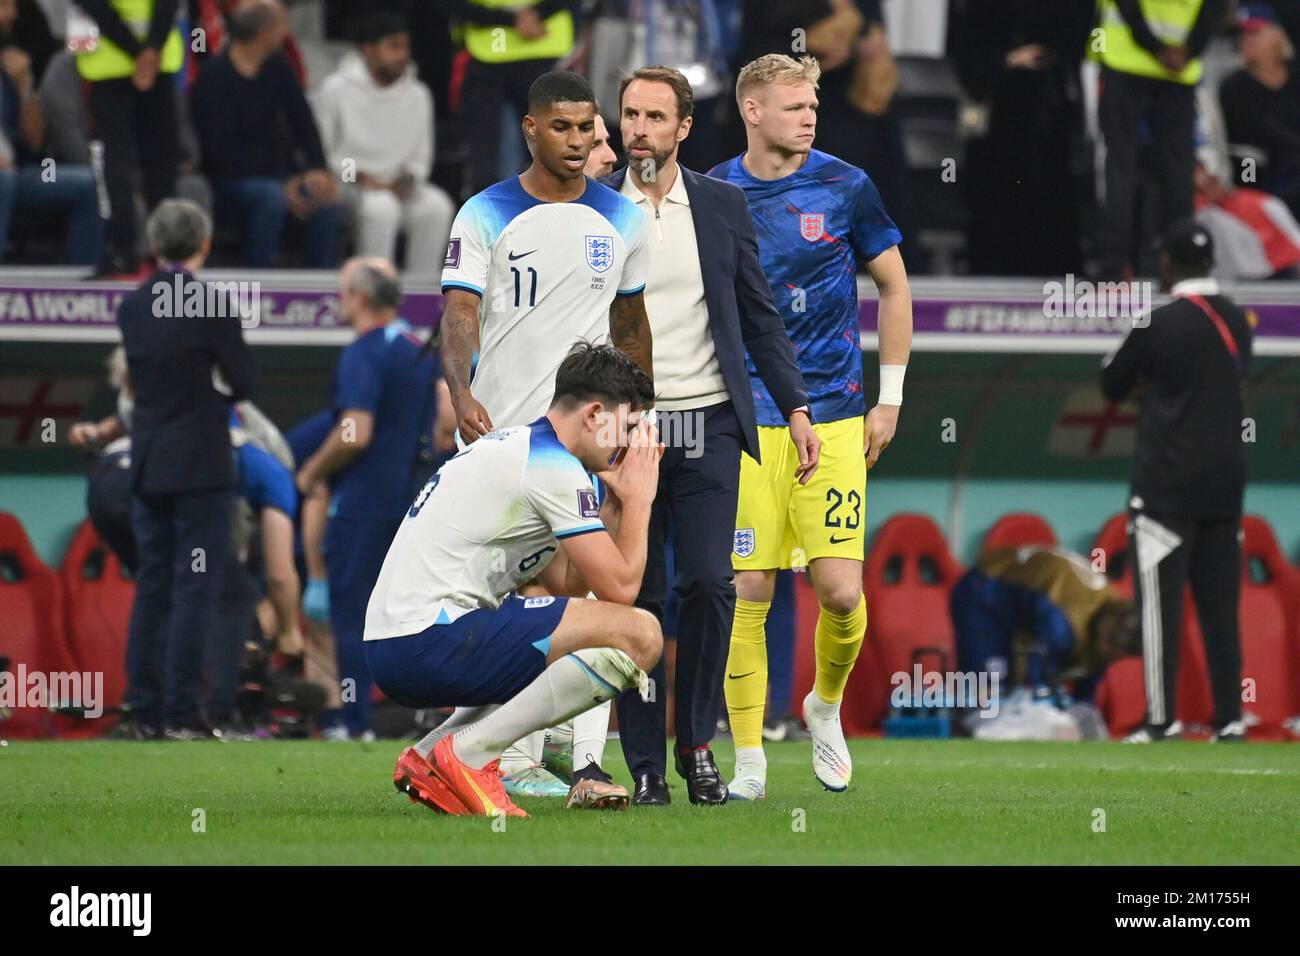 Al Khor, Qatar. 10th Dec, 2022. Harry MAGUIRE (ENG), Marcus RASHFORD (ENG),  Gareth SOUTHGATE (coach ENG), goalwart RAMSDALE Aaron (ENG) after end of  game, disappointment, frustrated, disappointed, frustratedriert, dejected,  action. jubilation, joy,